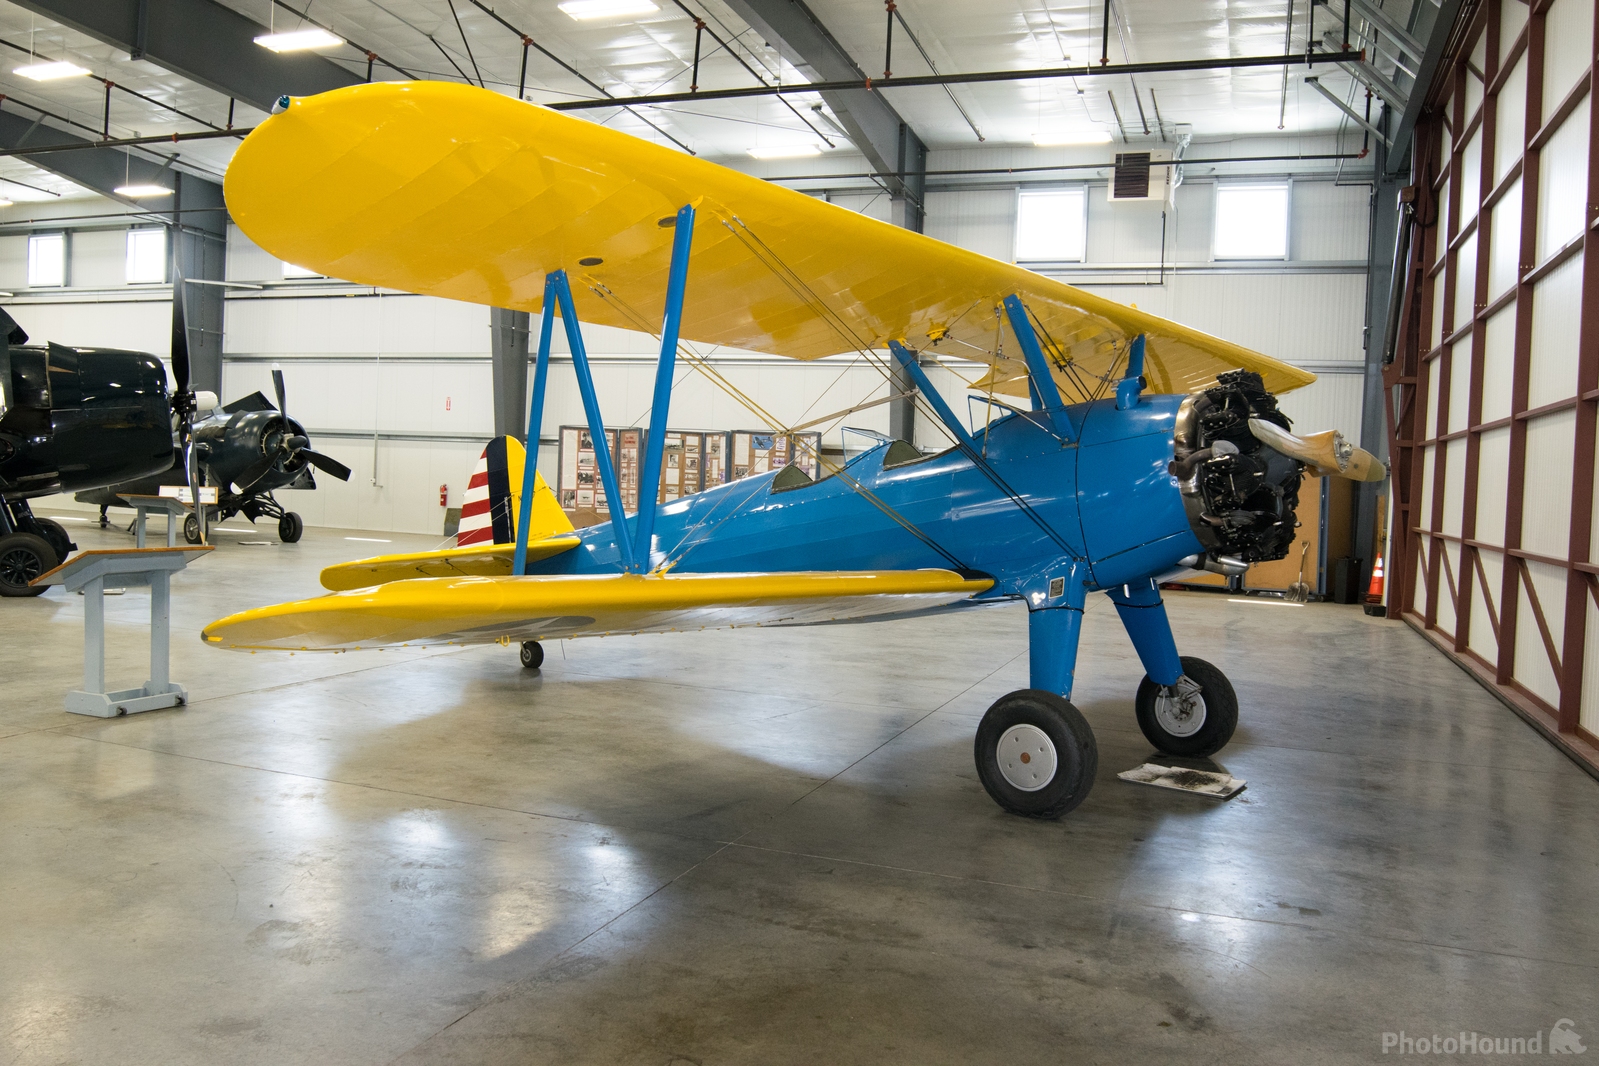 Image of Erickson Aircraft Museum by Steve West